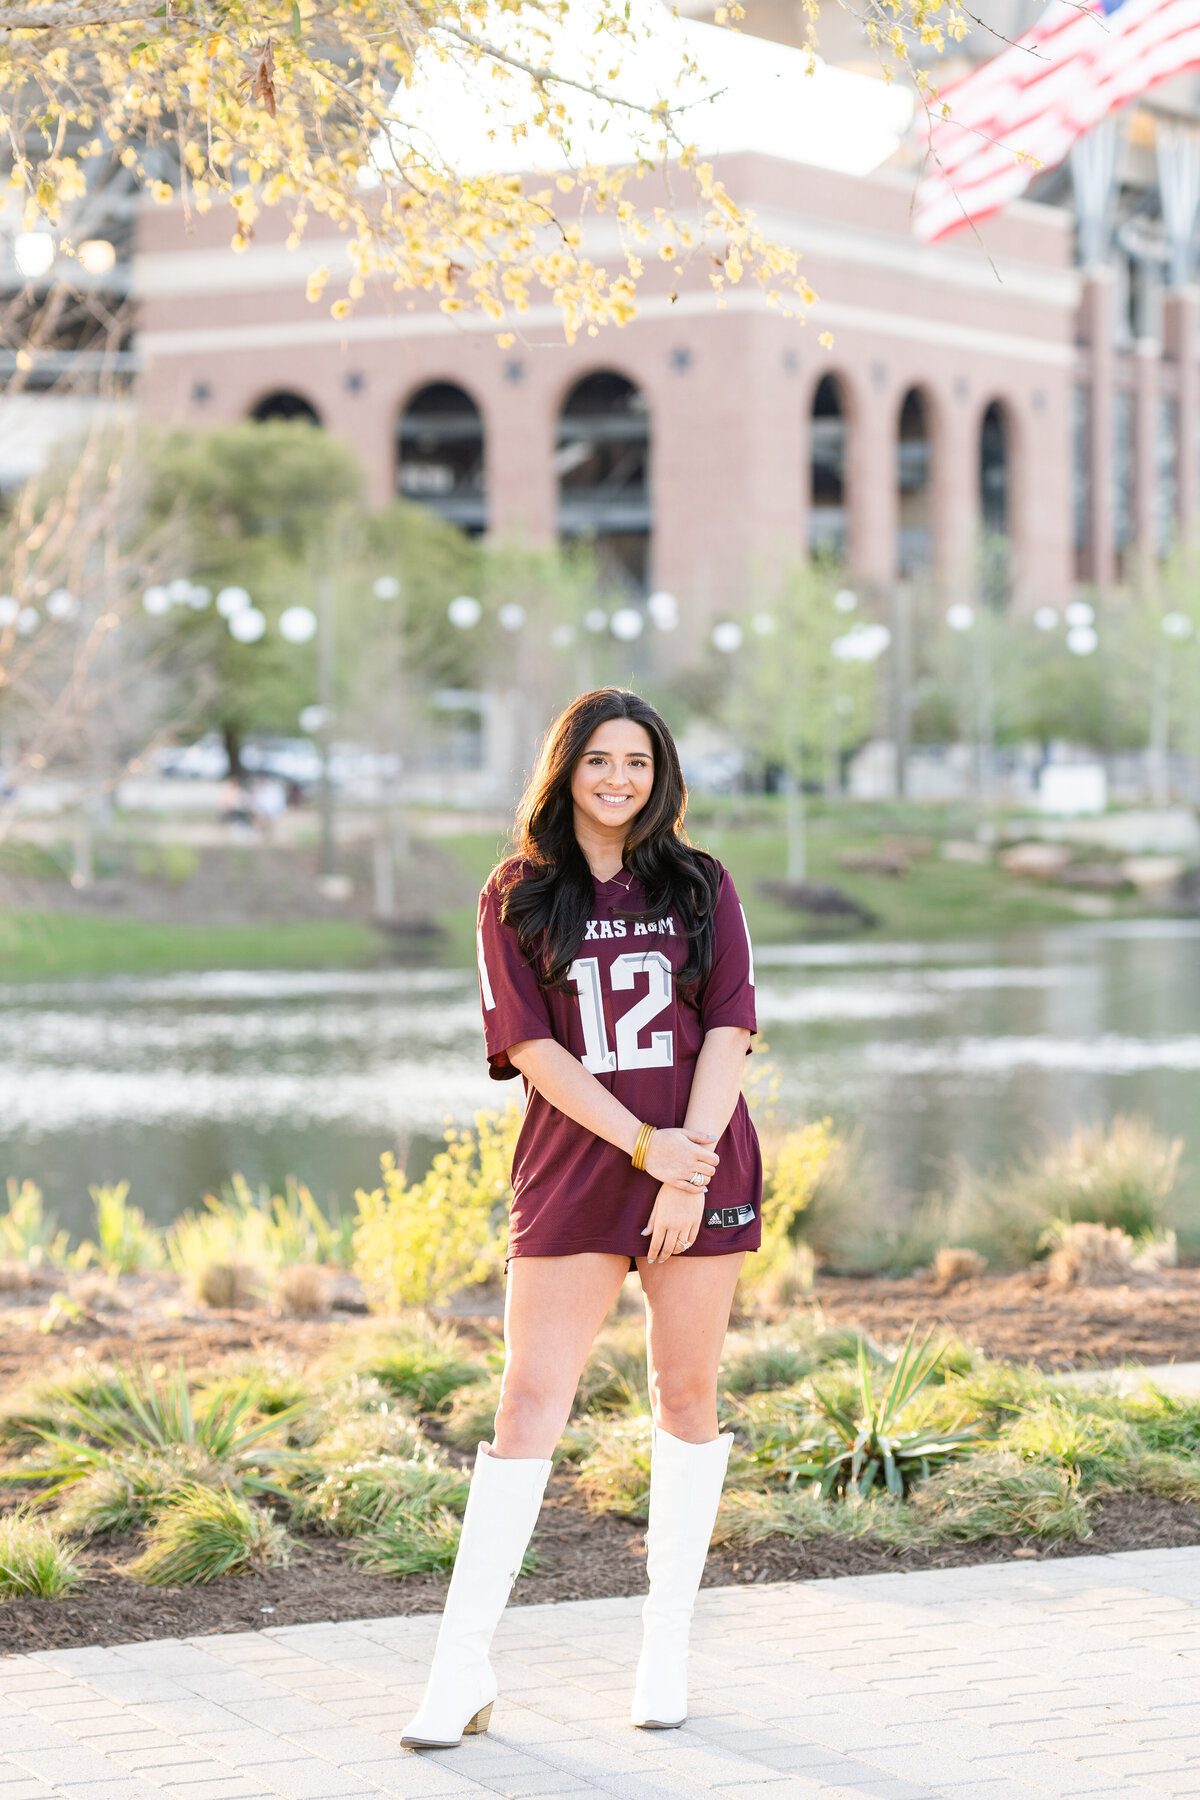 Texas A&M Senior in maroon jersey smiling at Aggie Park with Kyle Field in the background at sunset